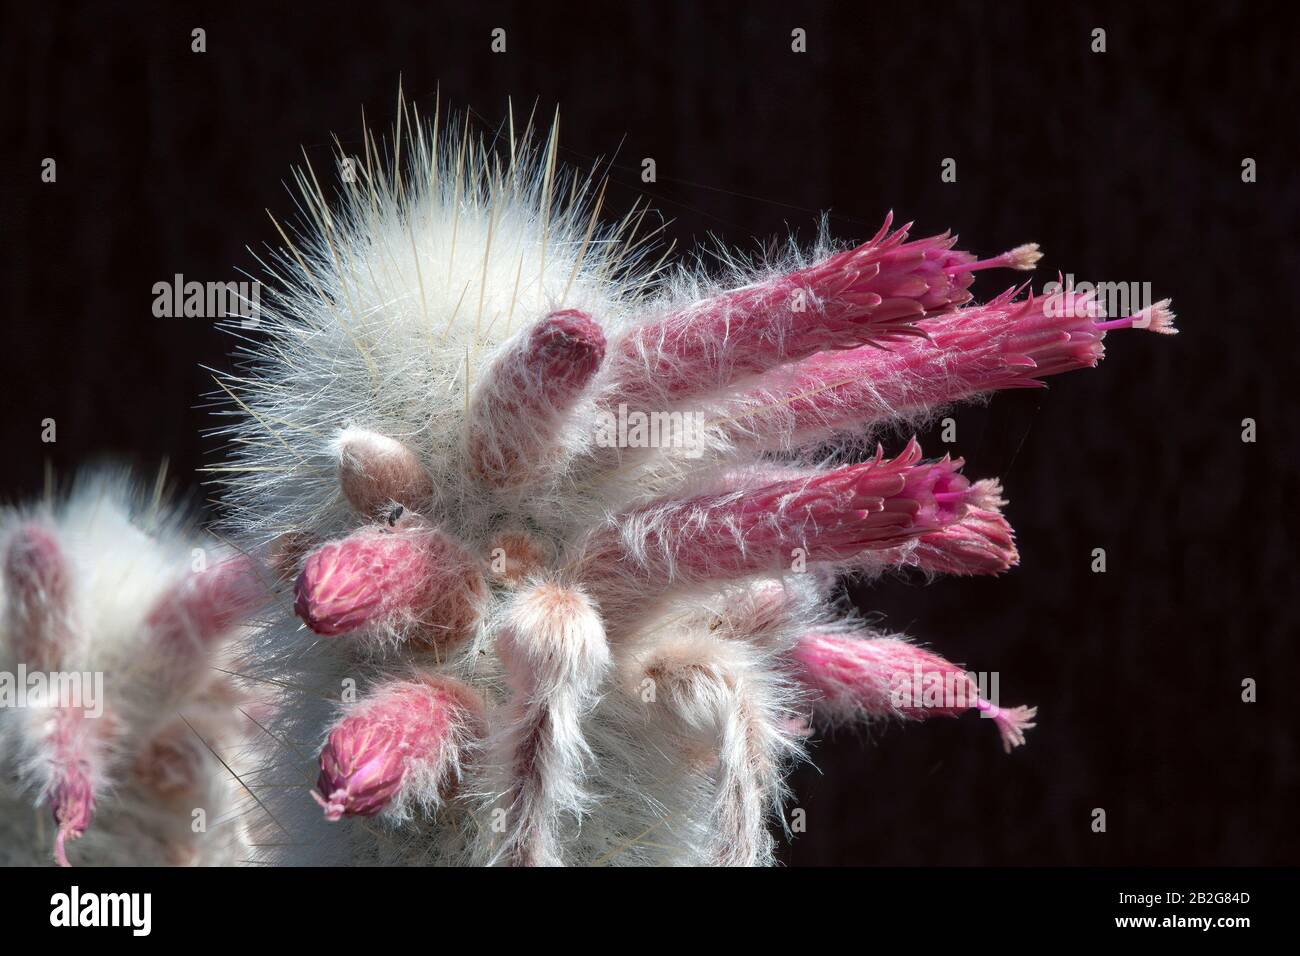 Sydney Australia, close-up of flowers at top of a Cleistocactus strausii or silver torch cactus Stock Photo